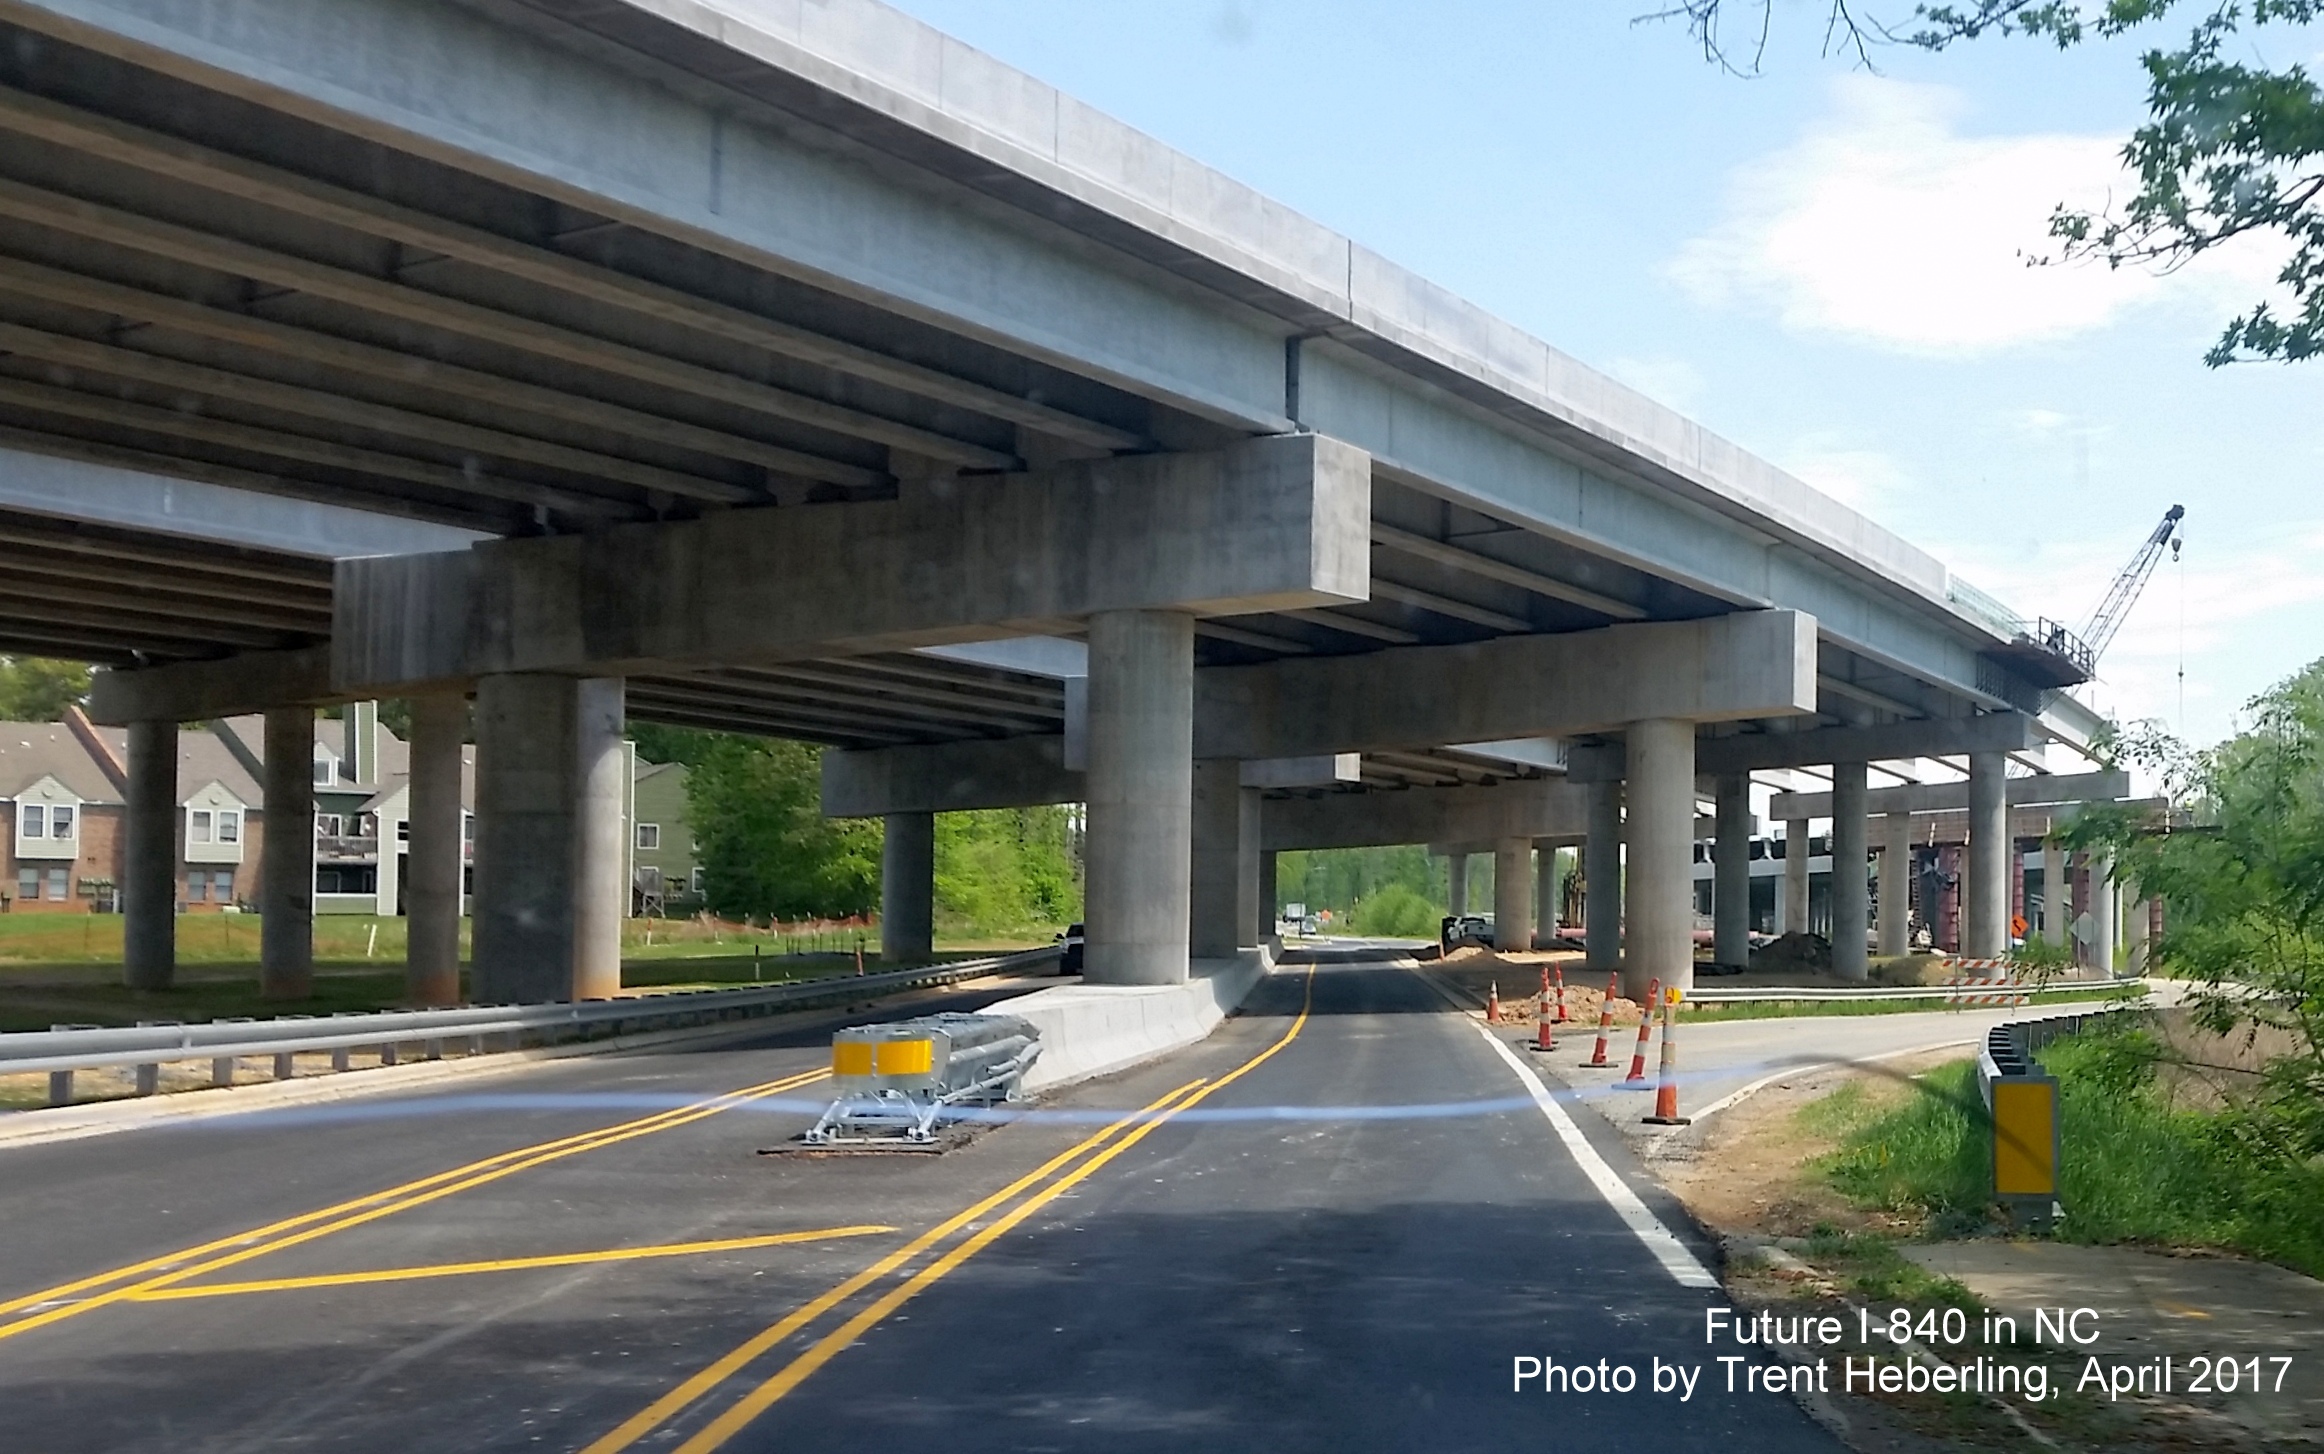 Image of future I-840 elevated highway in vicinity of Drawbridge Pkwy in Greensboro, by Trent Heberling